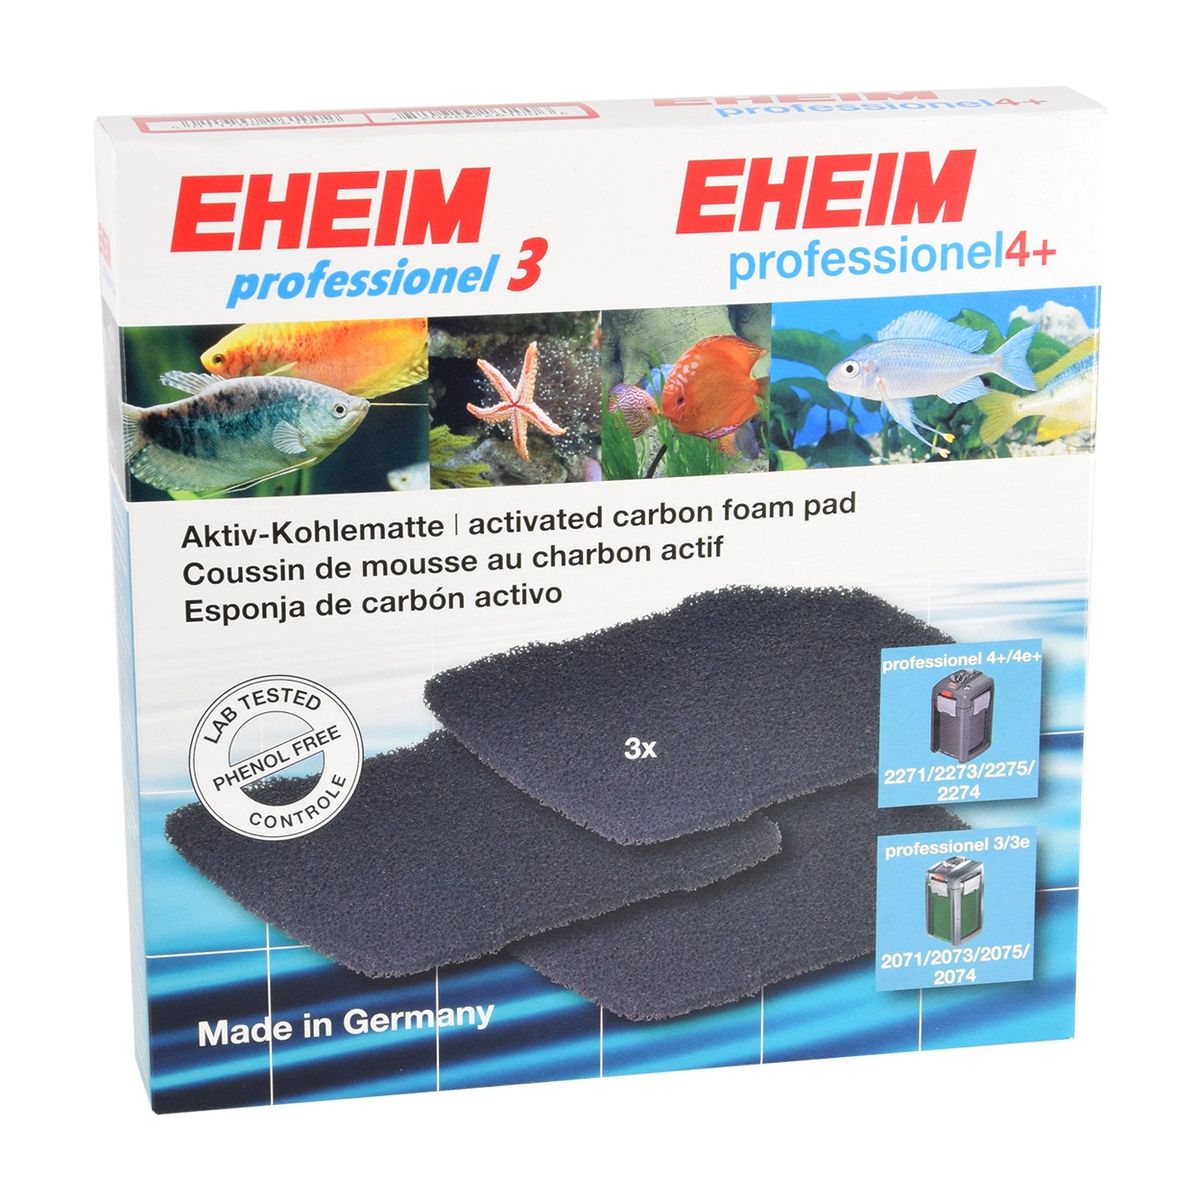 Eheim Activated Carbon Pads For 71 75 74 Pro 4 2271 2272 2273 2274 2275 3